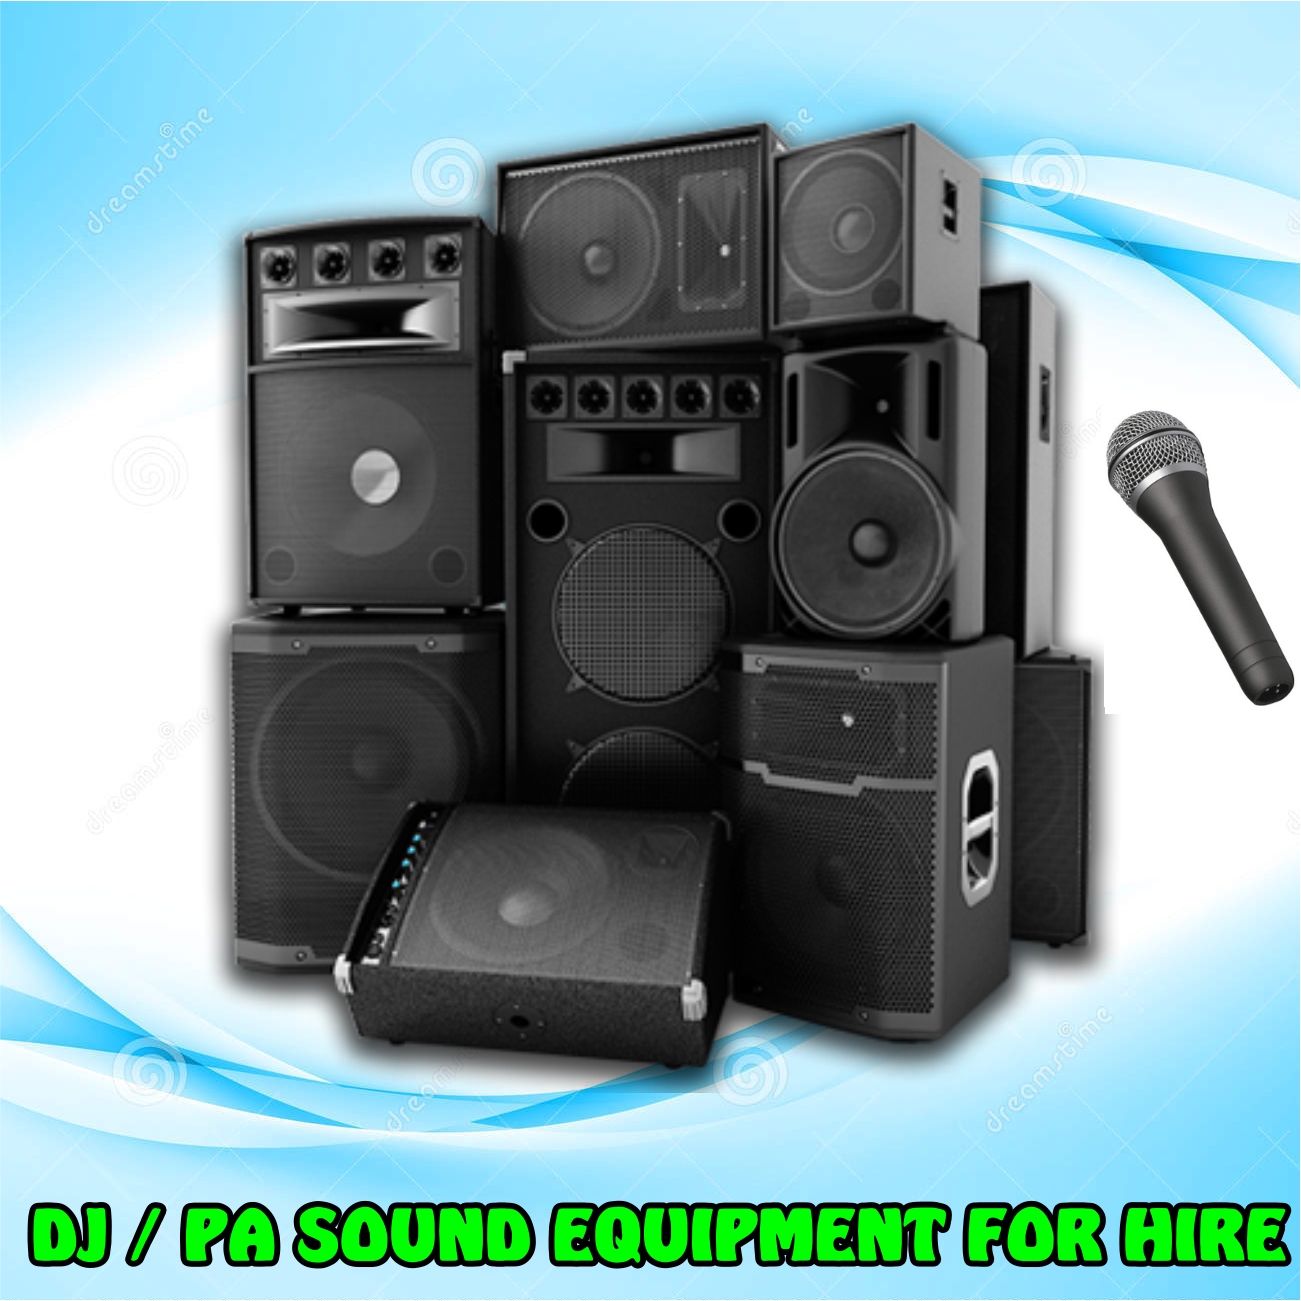 SOUND DJ EQUIPMENT FOR DRY HIRE FROM OUR STORE MOST AFFORDABLE DEAL FOR HIRING OF PA SOUND EQUIPMENT AT GRAVITY SOUND AND LIGHTING WAREHOUSE 0315072736 SOUND HIRE PA SYSTEMS FOR HIRE GRAVITY DJ STORE OUTDOOR SOUND SPEAKERS AMPS FOR HIRE DISCO SOUND SYSTEM FOR HIRE IN DURBAN GRAVITY DJ STORE MIC AND SPEAKERS FOR HIRE GRAVITY DJ STORE 0315072463 DJ MIXER CONSOLE FOR HIRE IN DURBAN GRAVITY SOUND AND LIGHTING WAREHOUSE 0315072736